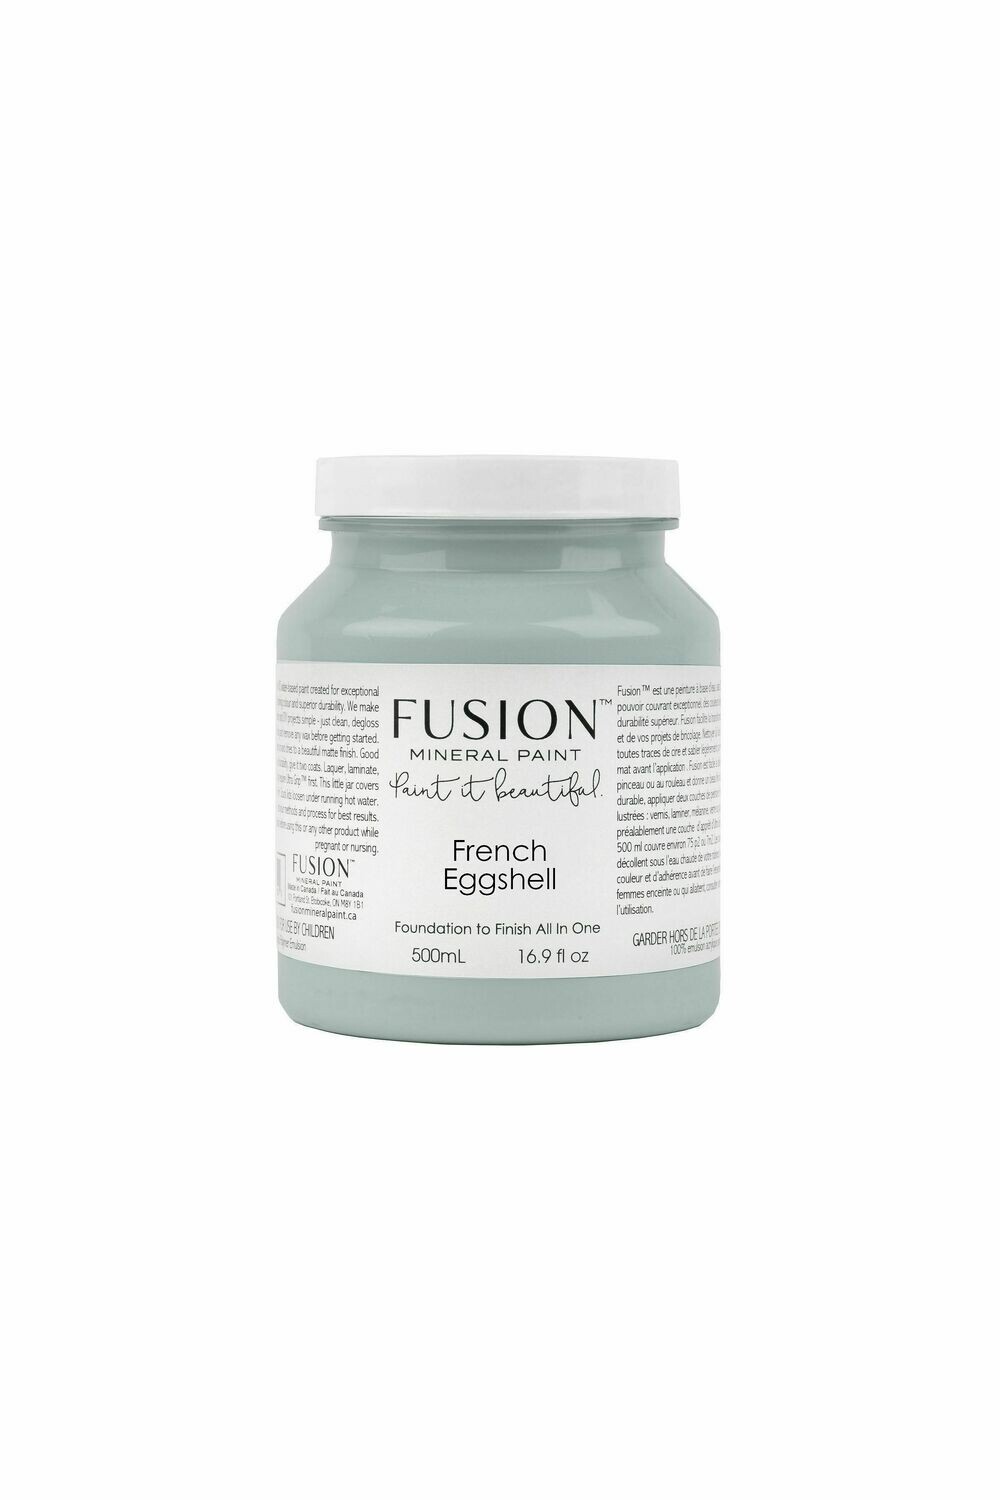 Fusion Mineral Paint French Eggshell 1 Pint